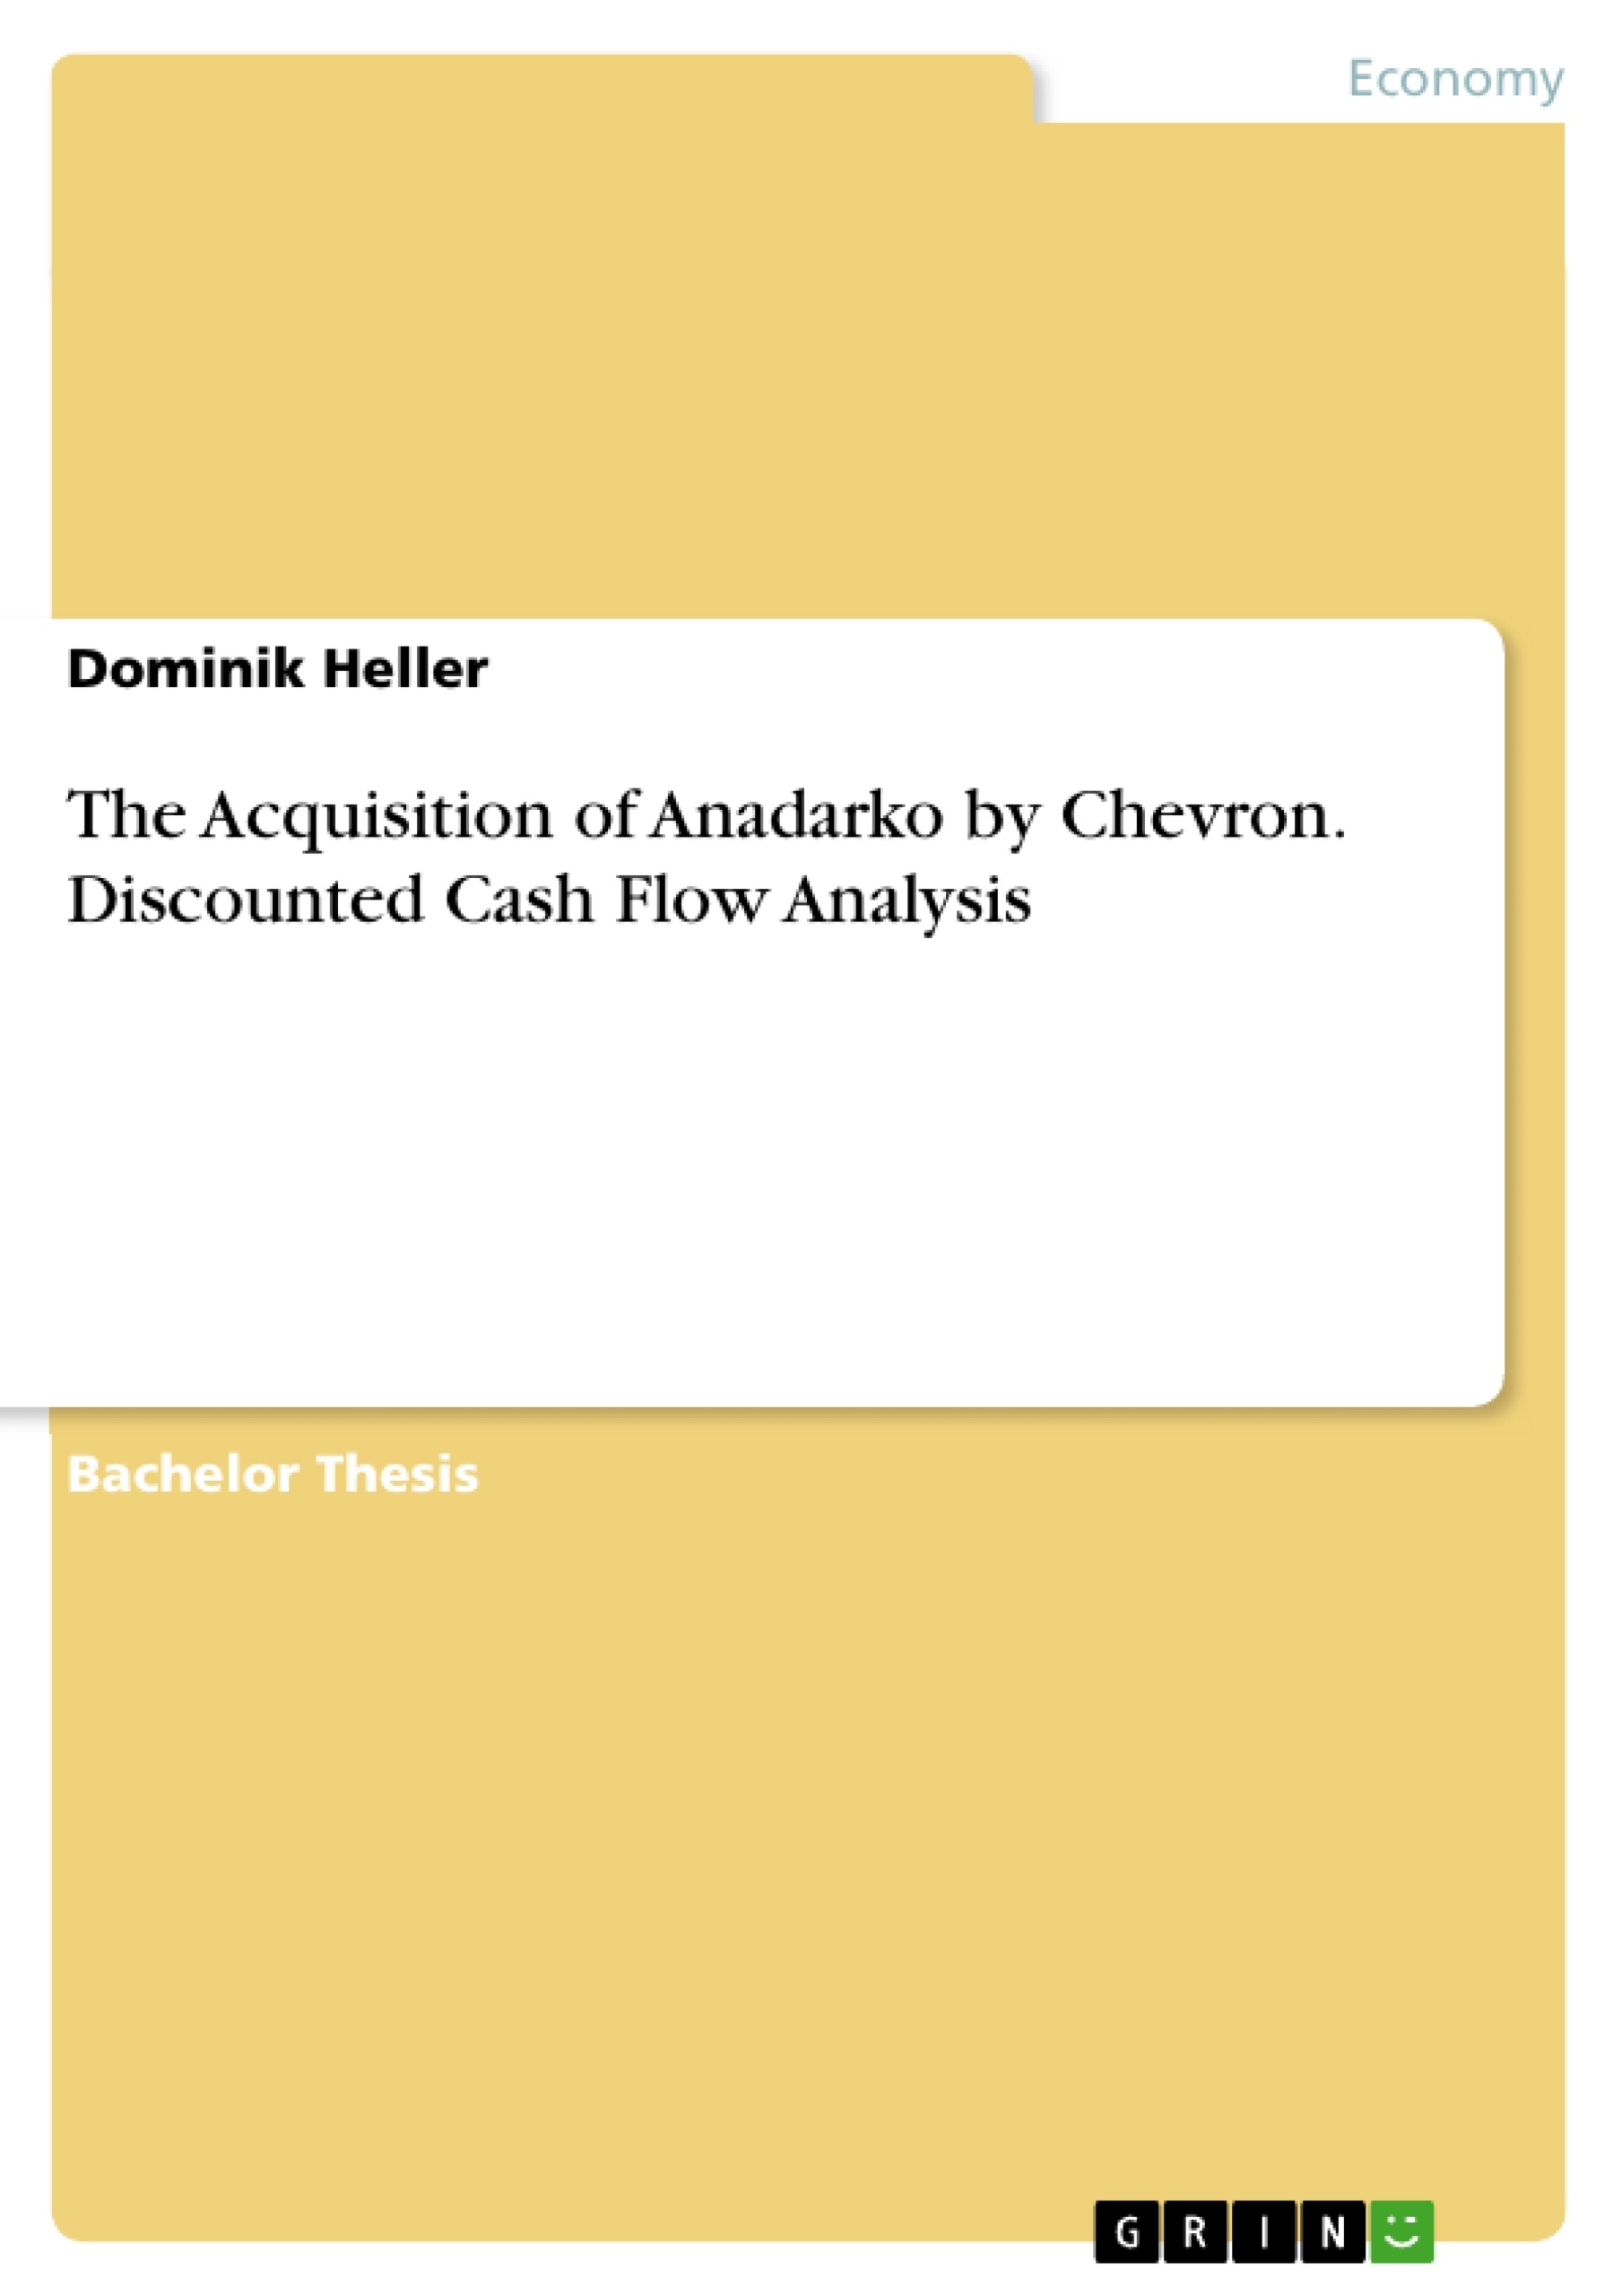 Titre: The Acquisition of Anadarko by Chevron. Discounted Cash Flow Analysis